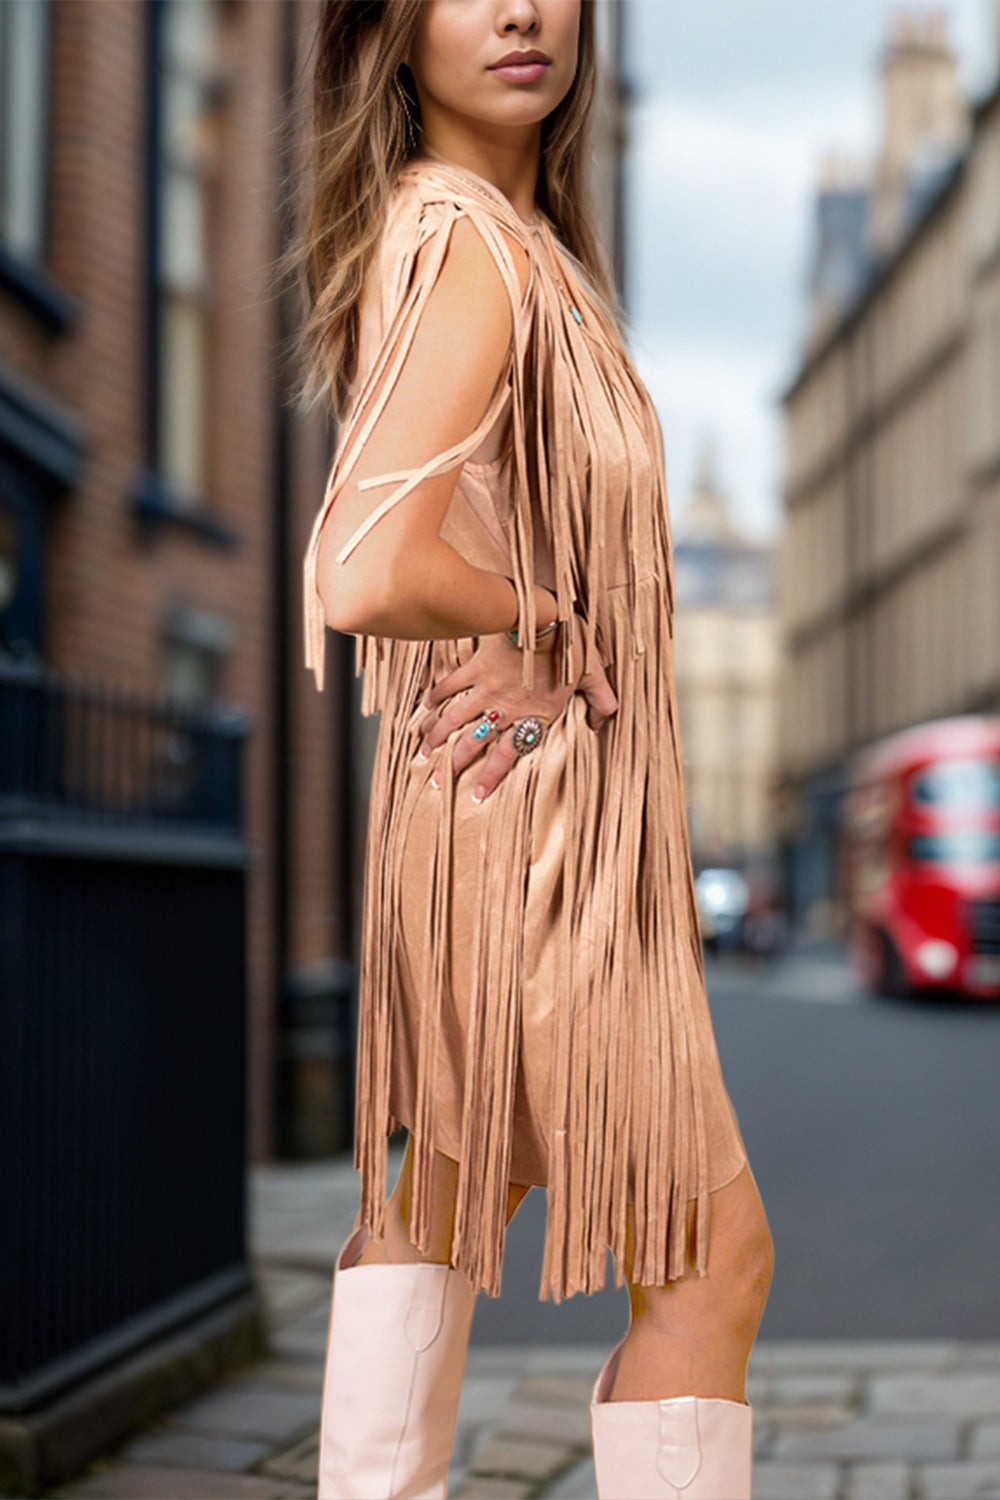 Full Size Fringe V-Neck Sleeveless Mini Dress - Tophatter Deals and Online Shopping - Electronics, Jewelry, Beauty, Health, Gadgets, Fashion - Tophatter's Discounts & Offers - tophatters - tophatters.co